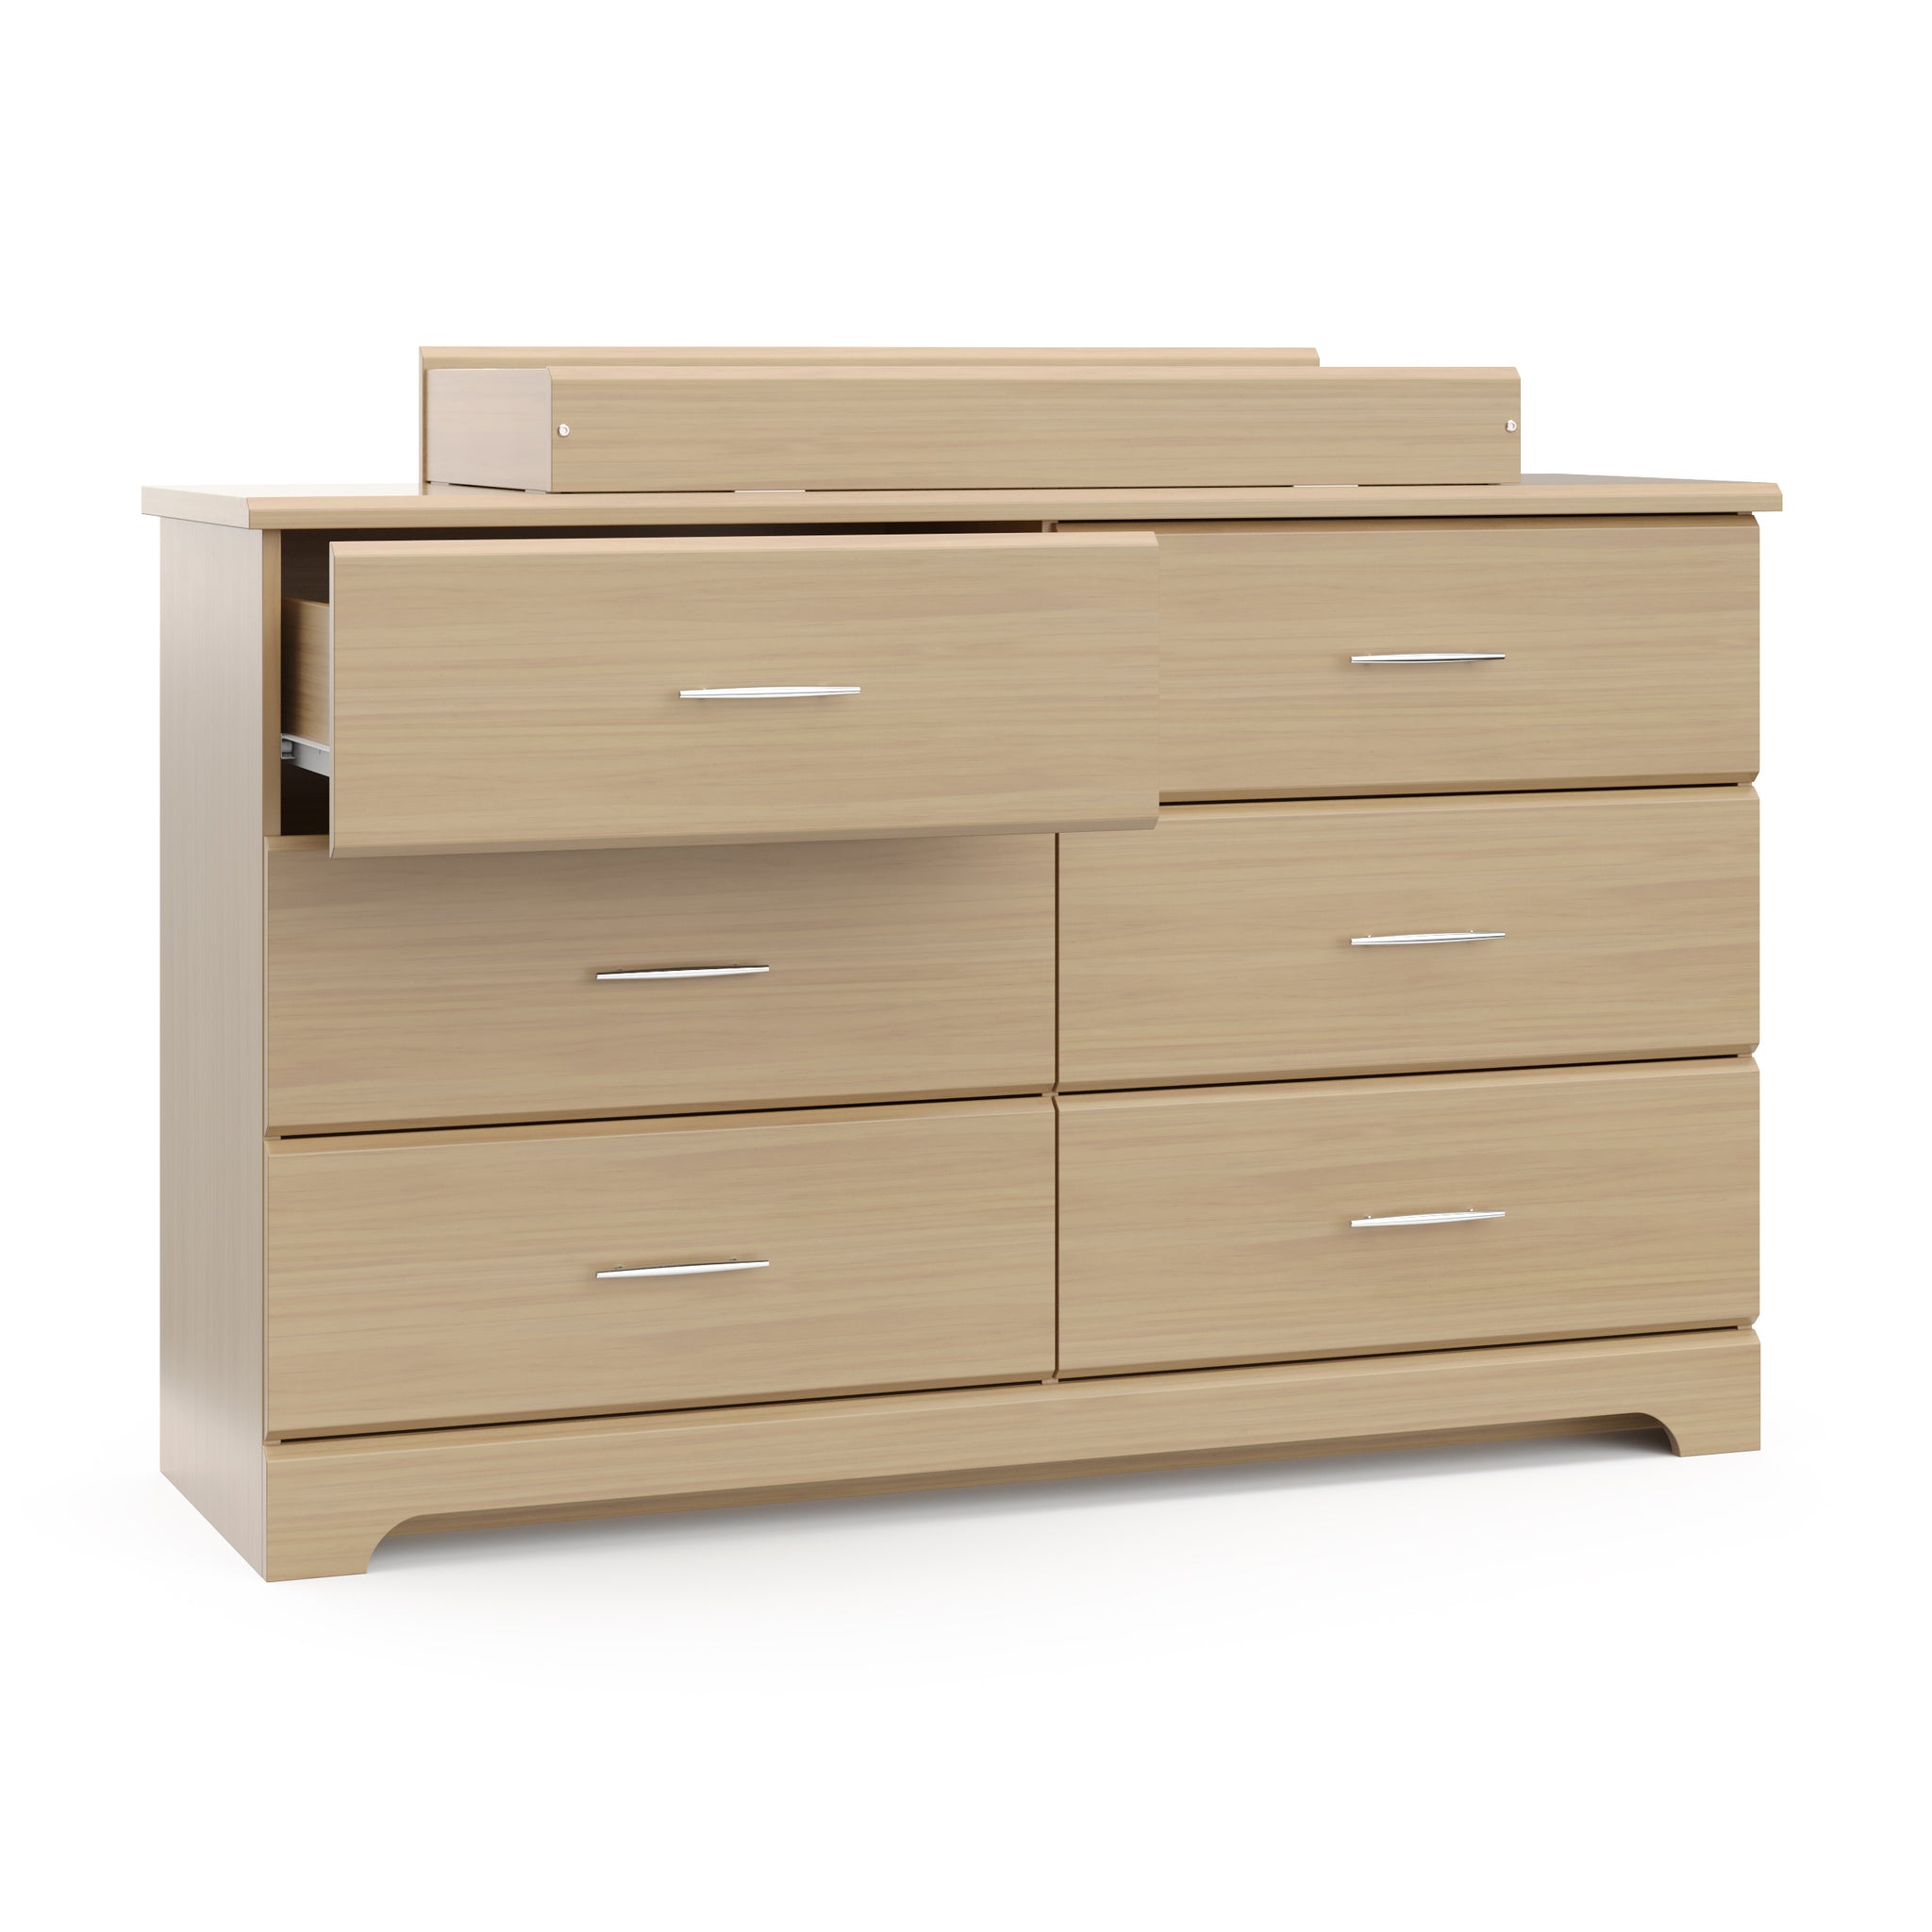 Driftwood 6 drawer dresser with open drawer with changing topper